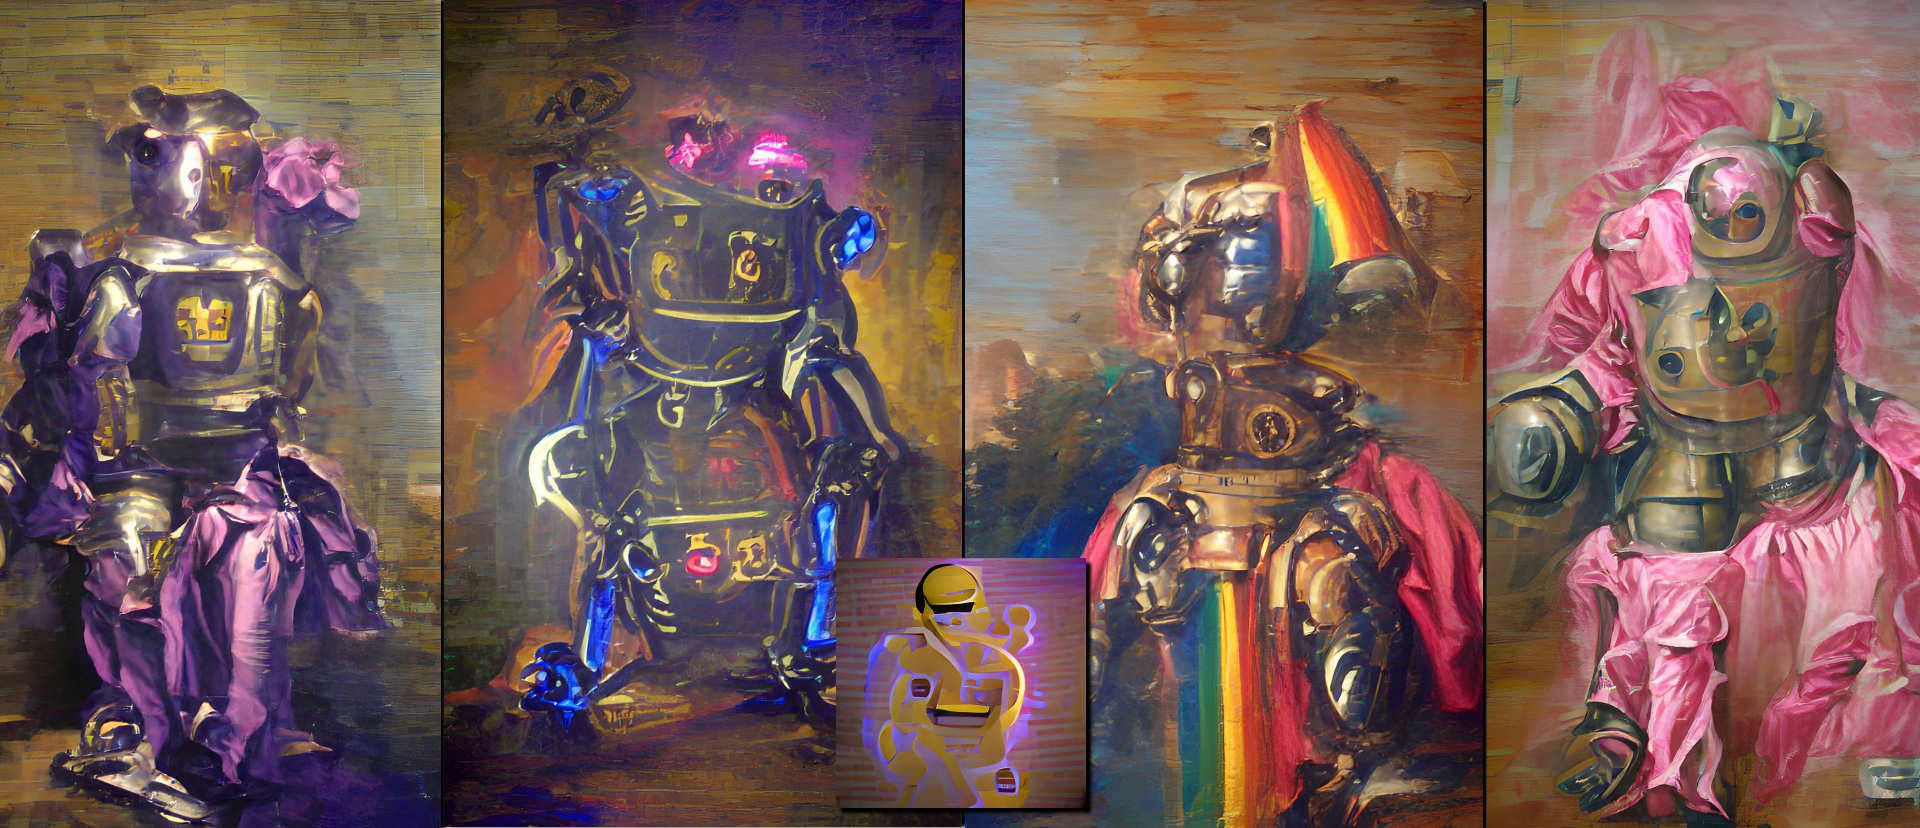 The Colourful Robots